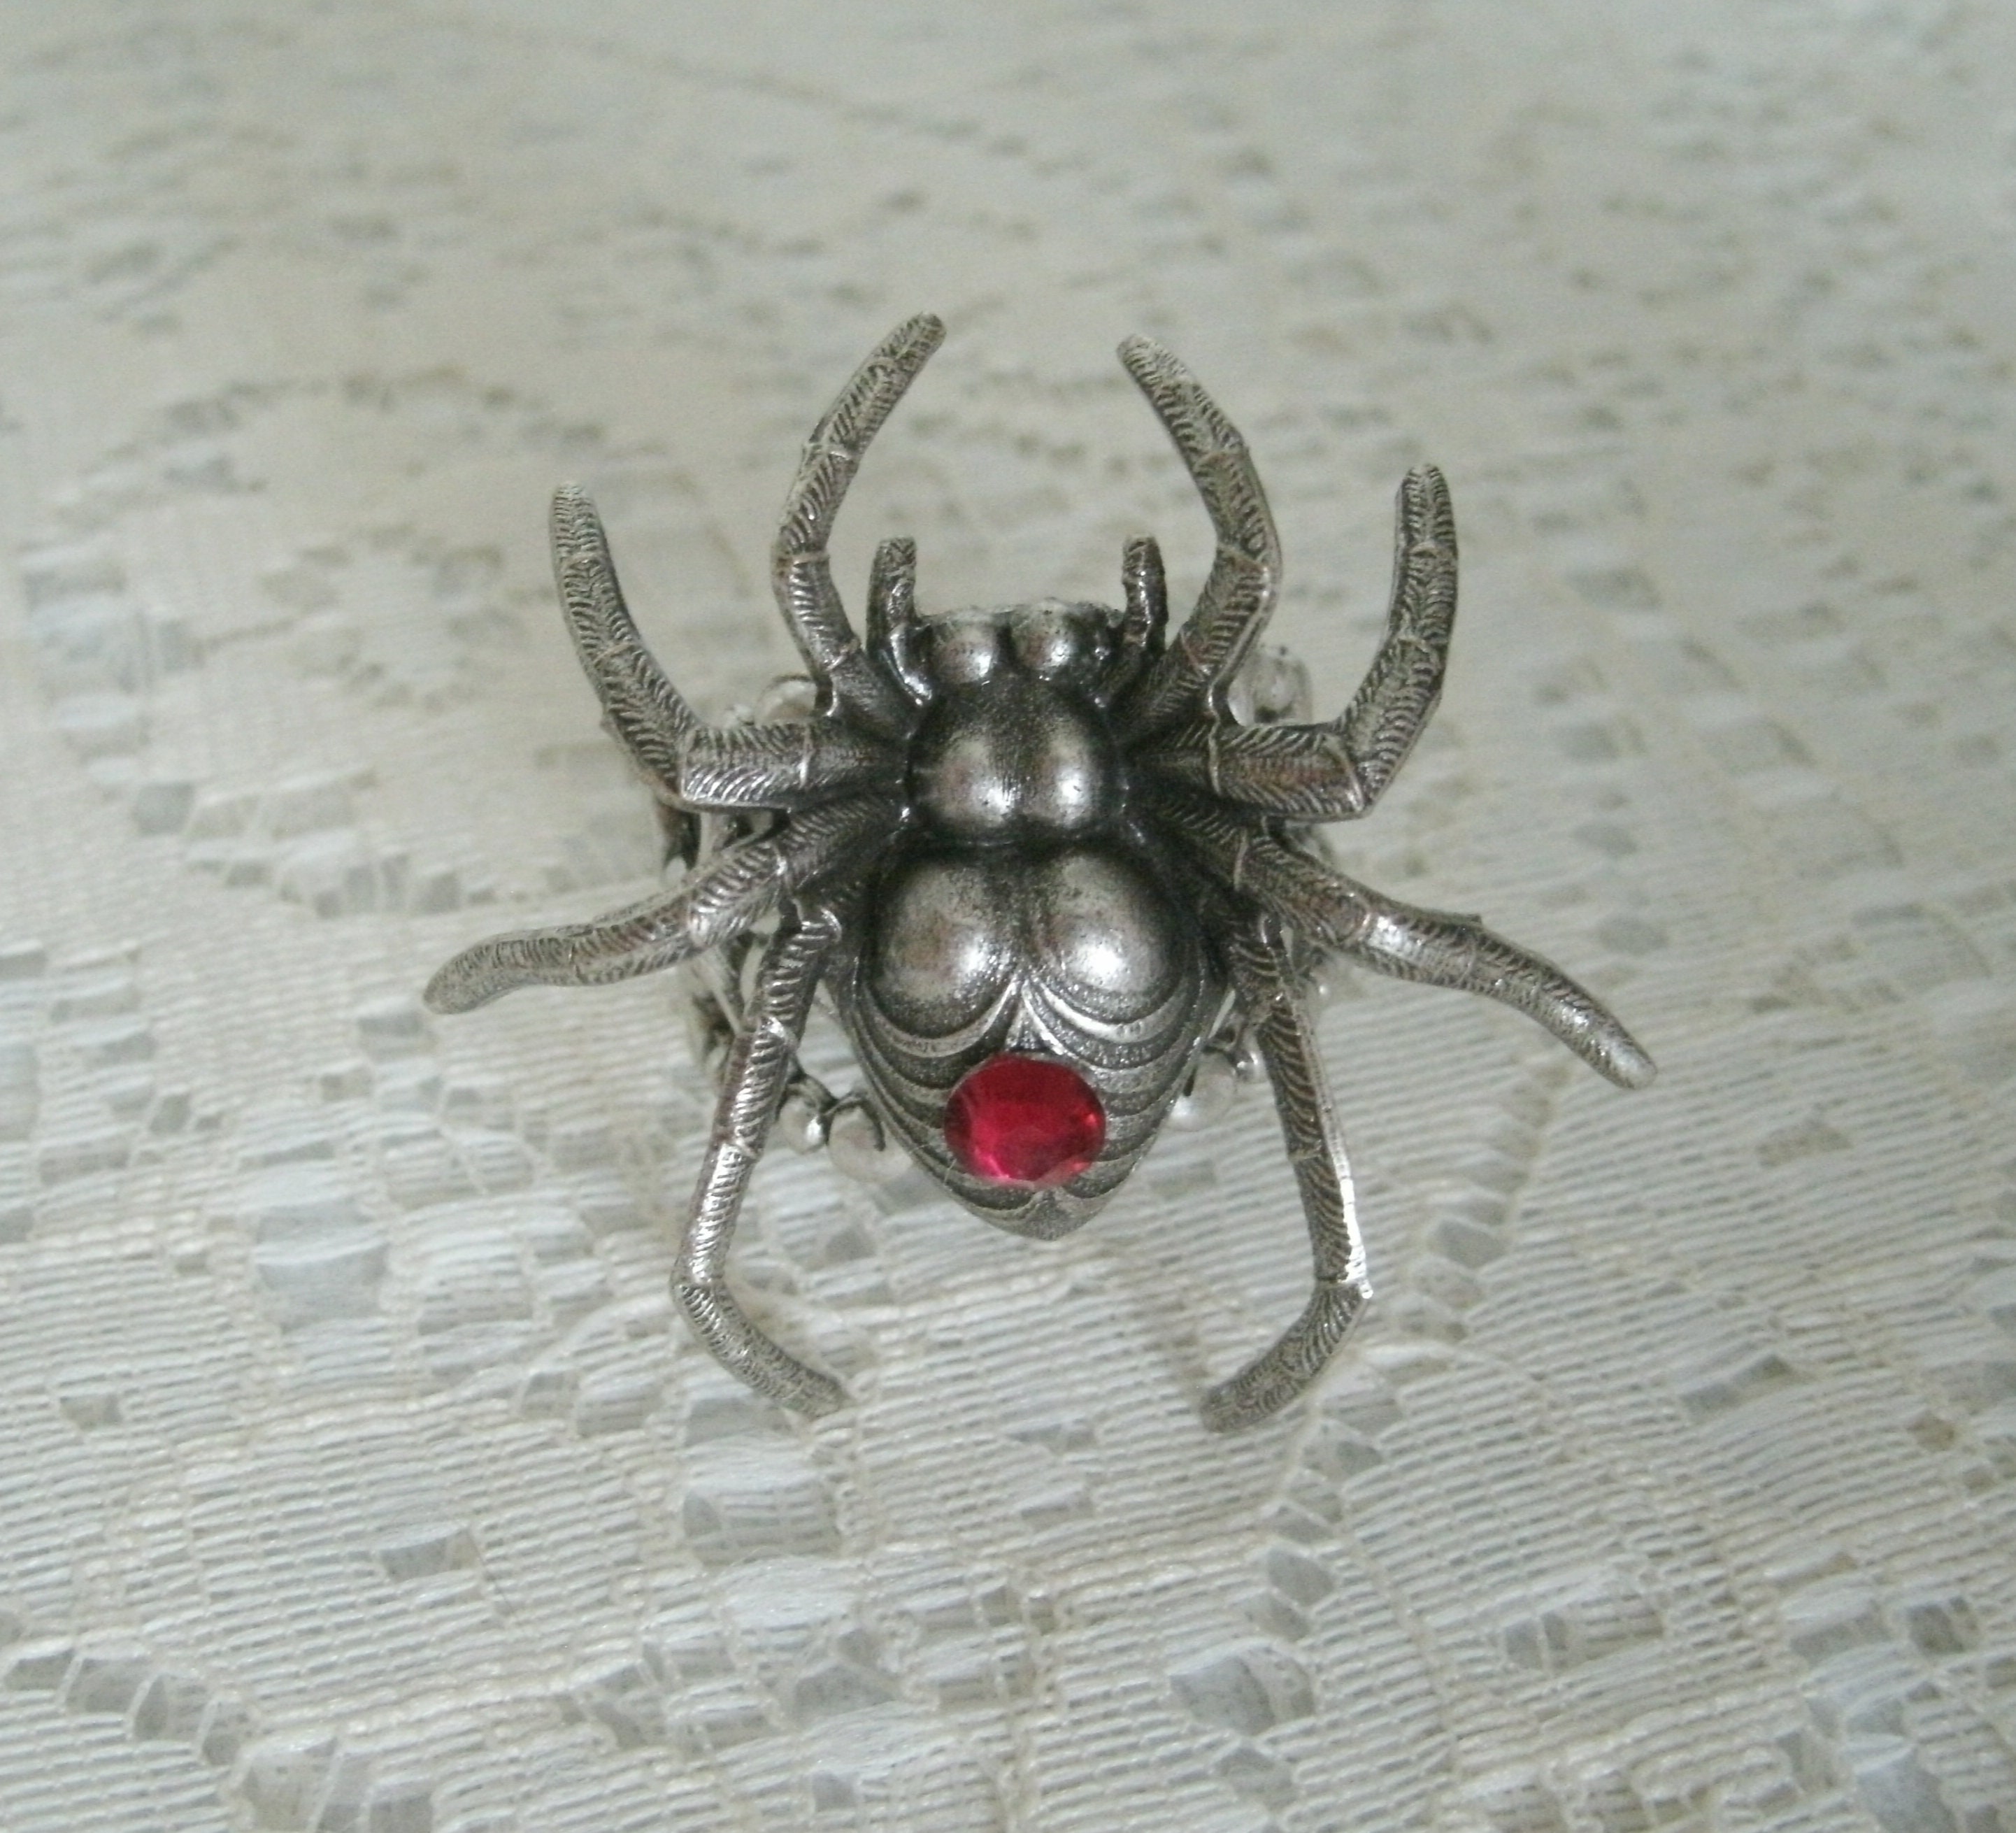 Animal Ring Unique Spider jewelry Gothic Ring Adjustable Ring Wiccan Jewelry Gothic Jewellery Black Widow Silver Bronze Spider Ring